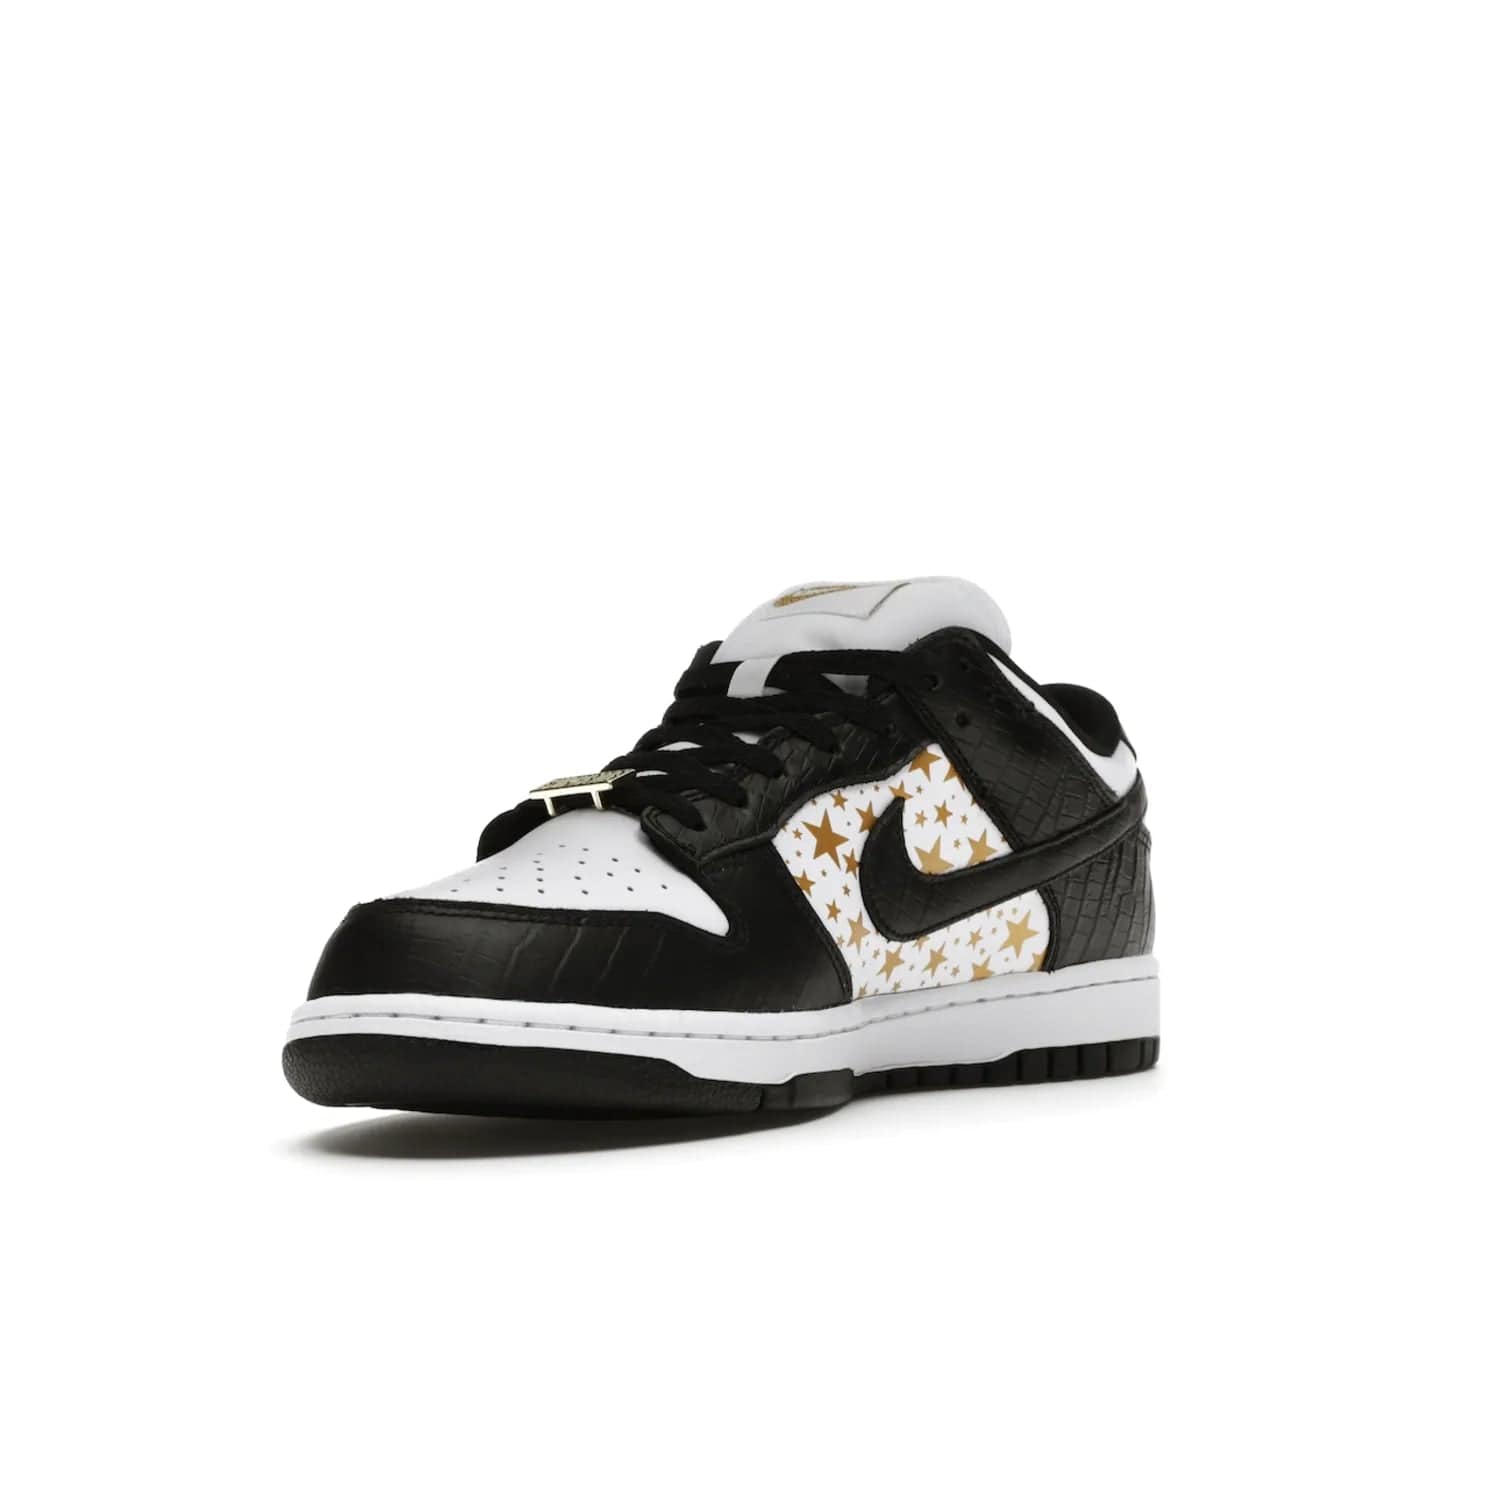 Nike SB Dunk Low Supreme Stars Black (2021) - Image 14 - Only at www.BallersClubKickz.com - Retro style and signature details make the Nike SB Dunk Low Supreme Black a must-have. This special edition shoe features a white leather upper and black croc skin overlays complemented by gold stars and deubré. Enjoy a piece of SB history and grab yours today.